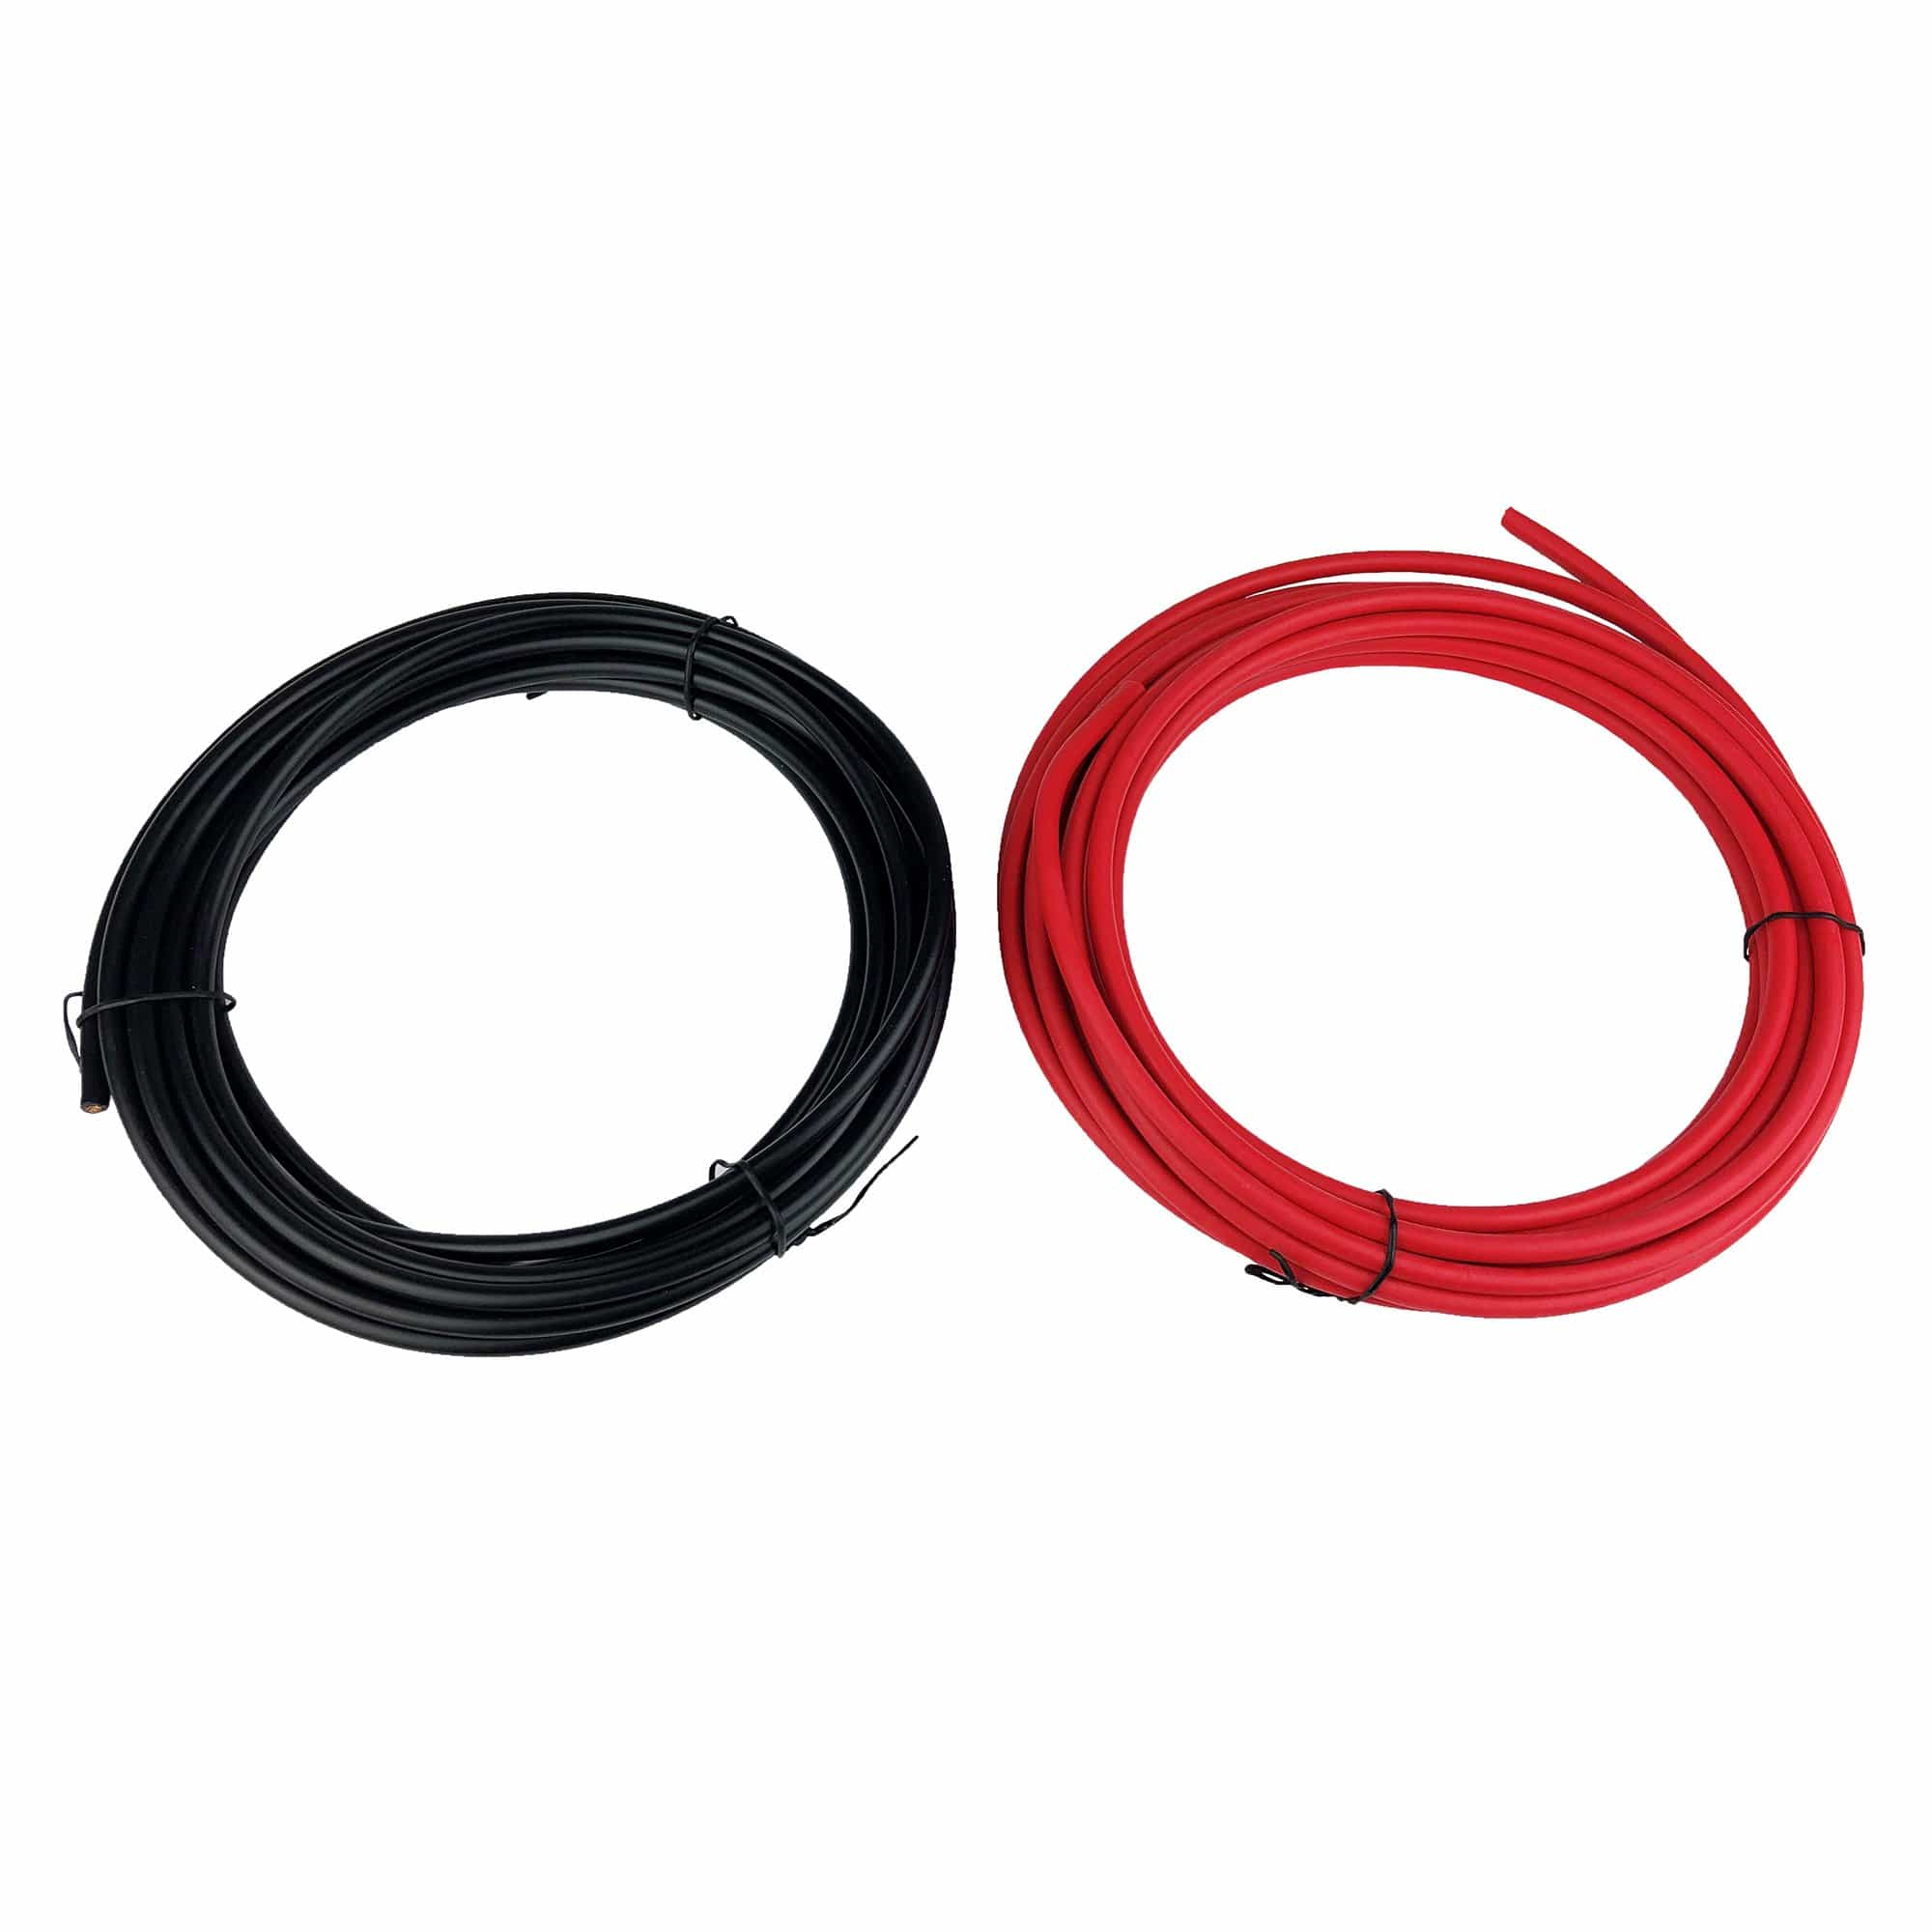 Attwood 14361-5 20' 8 AWG Red/Black Copper Wire